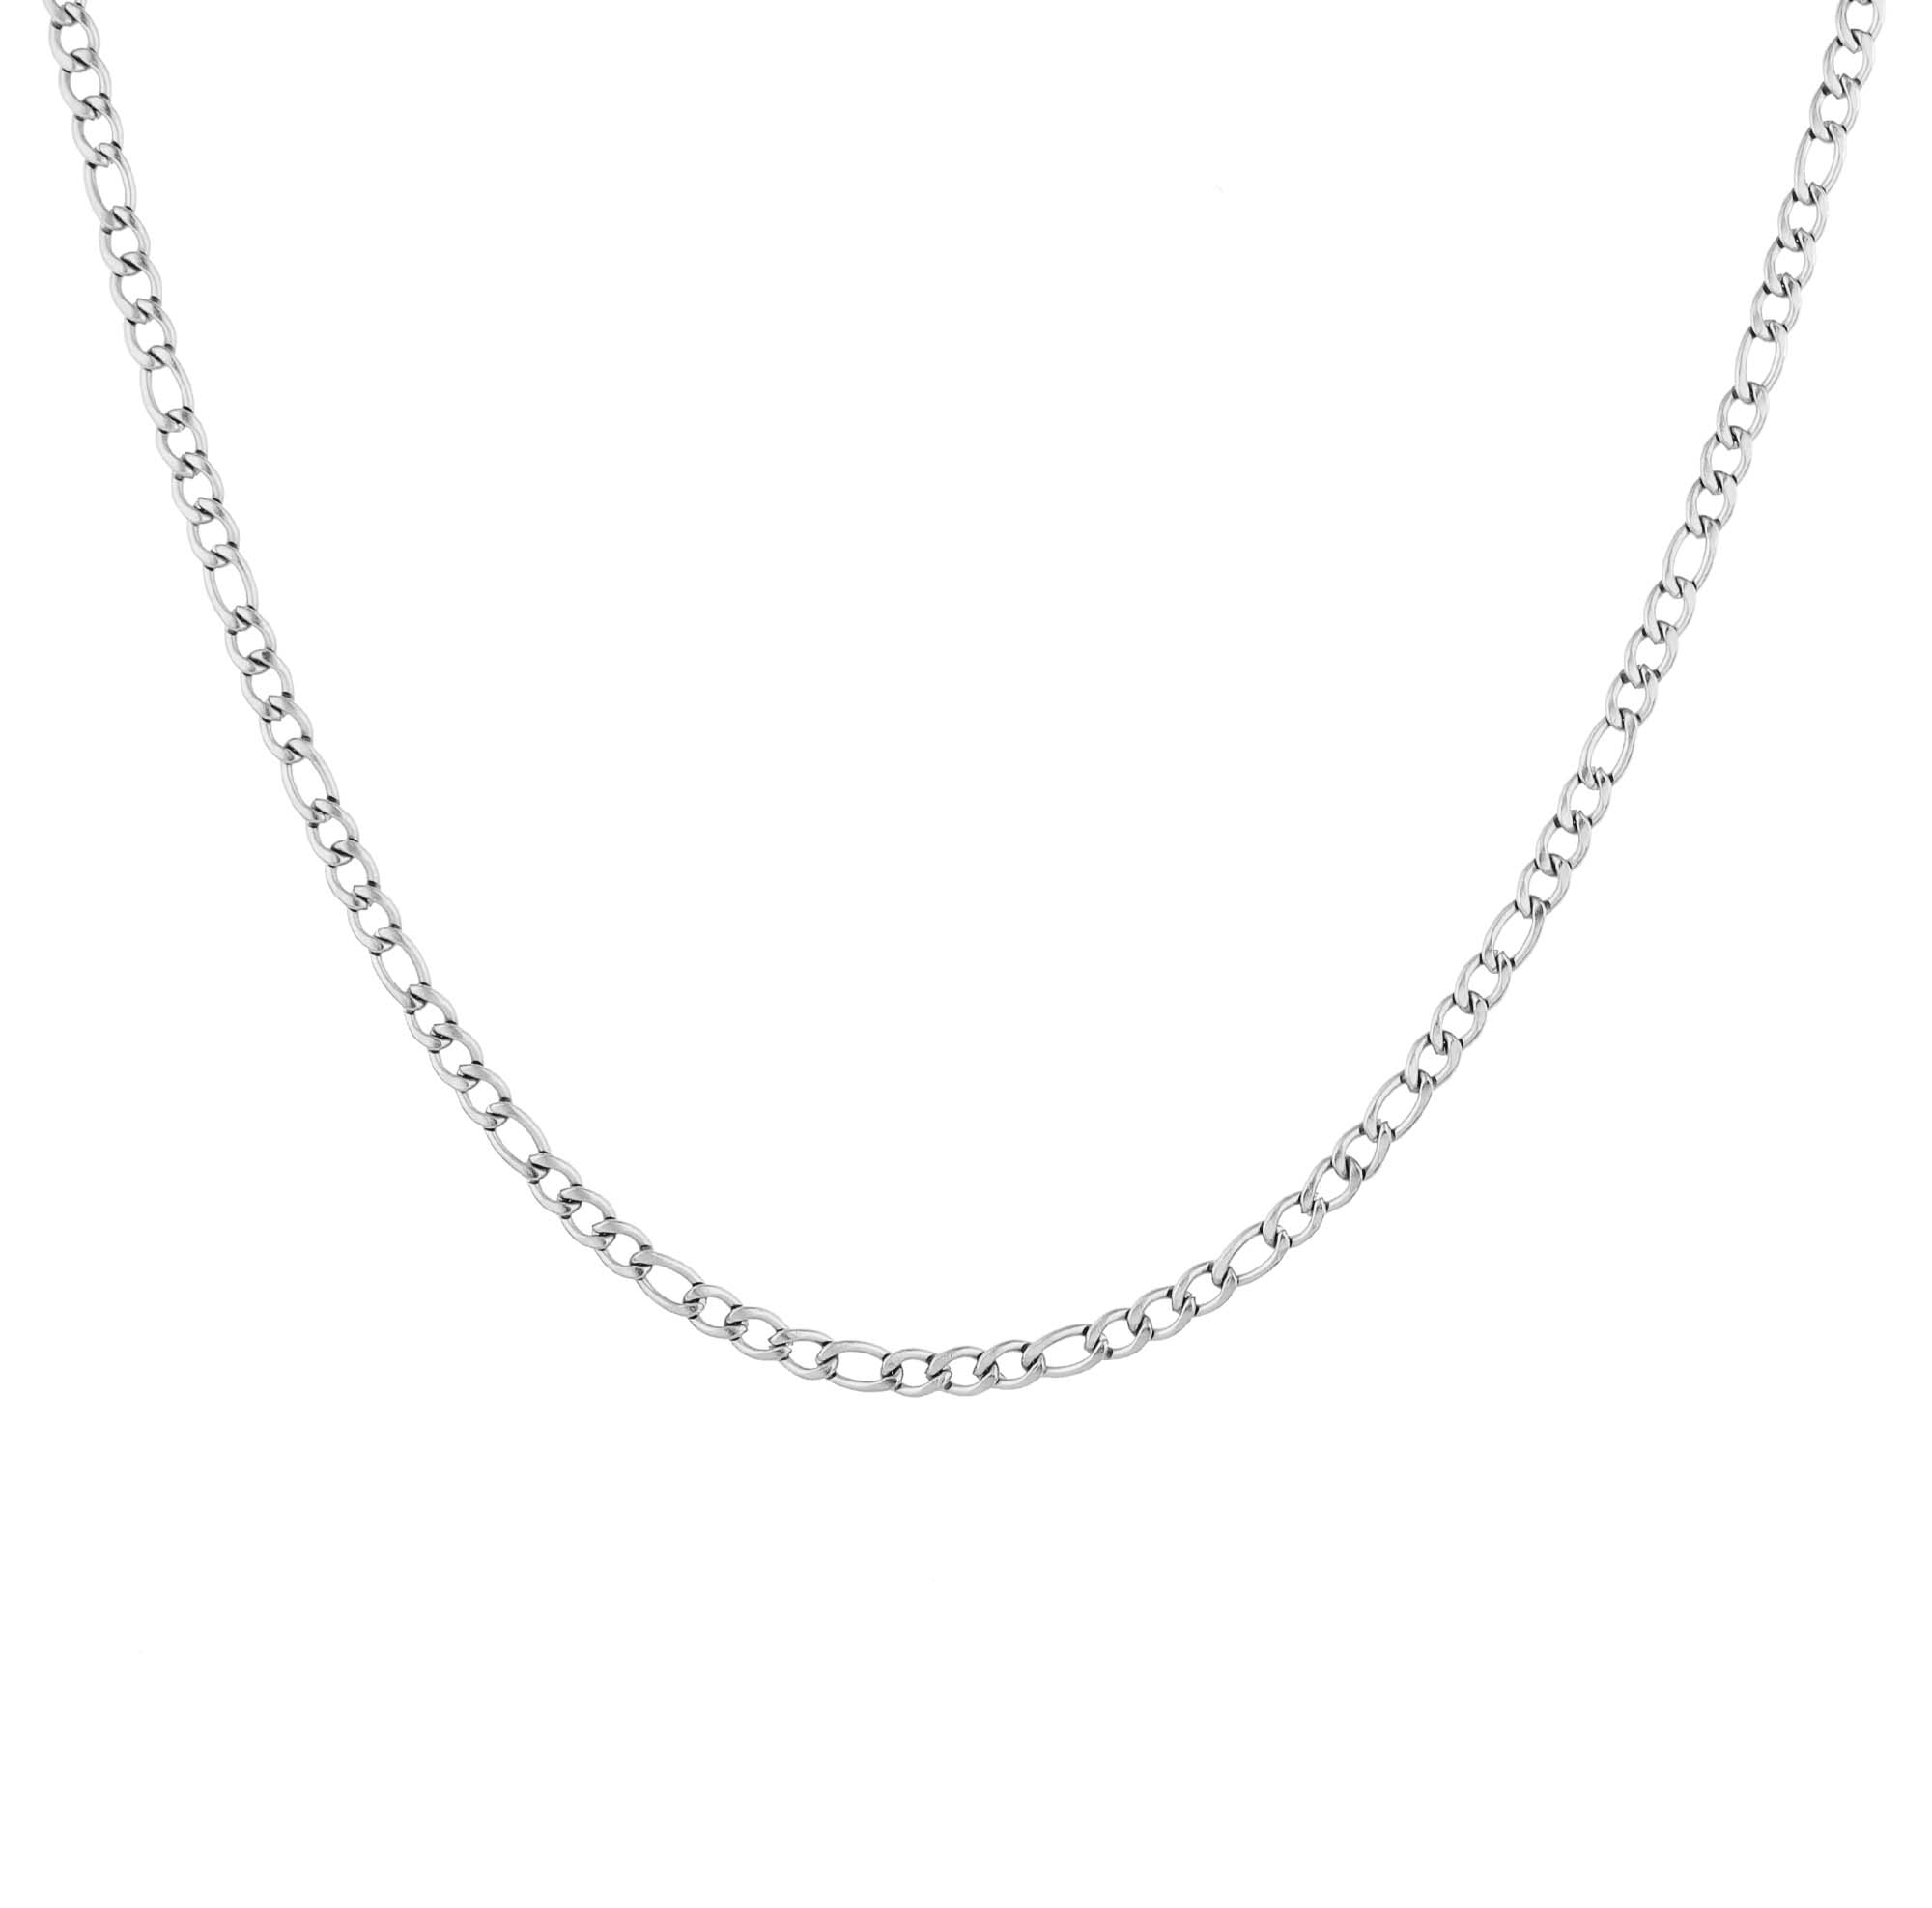 FJ Watches figaro necklace chain silver men 4mm 65cm stainless steel